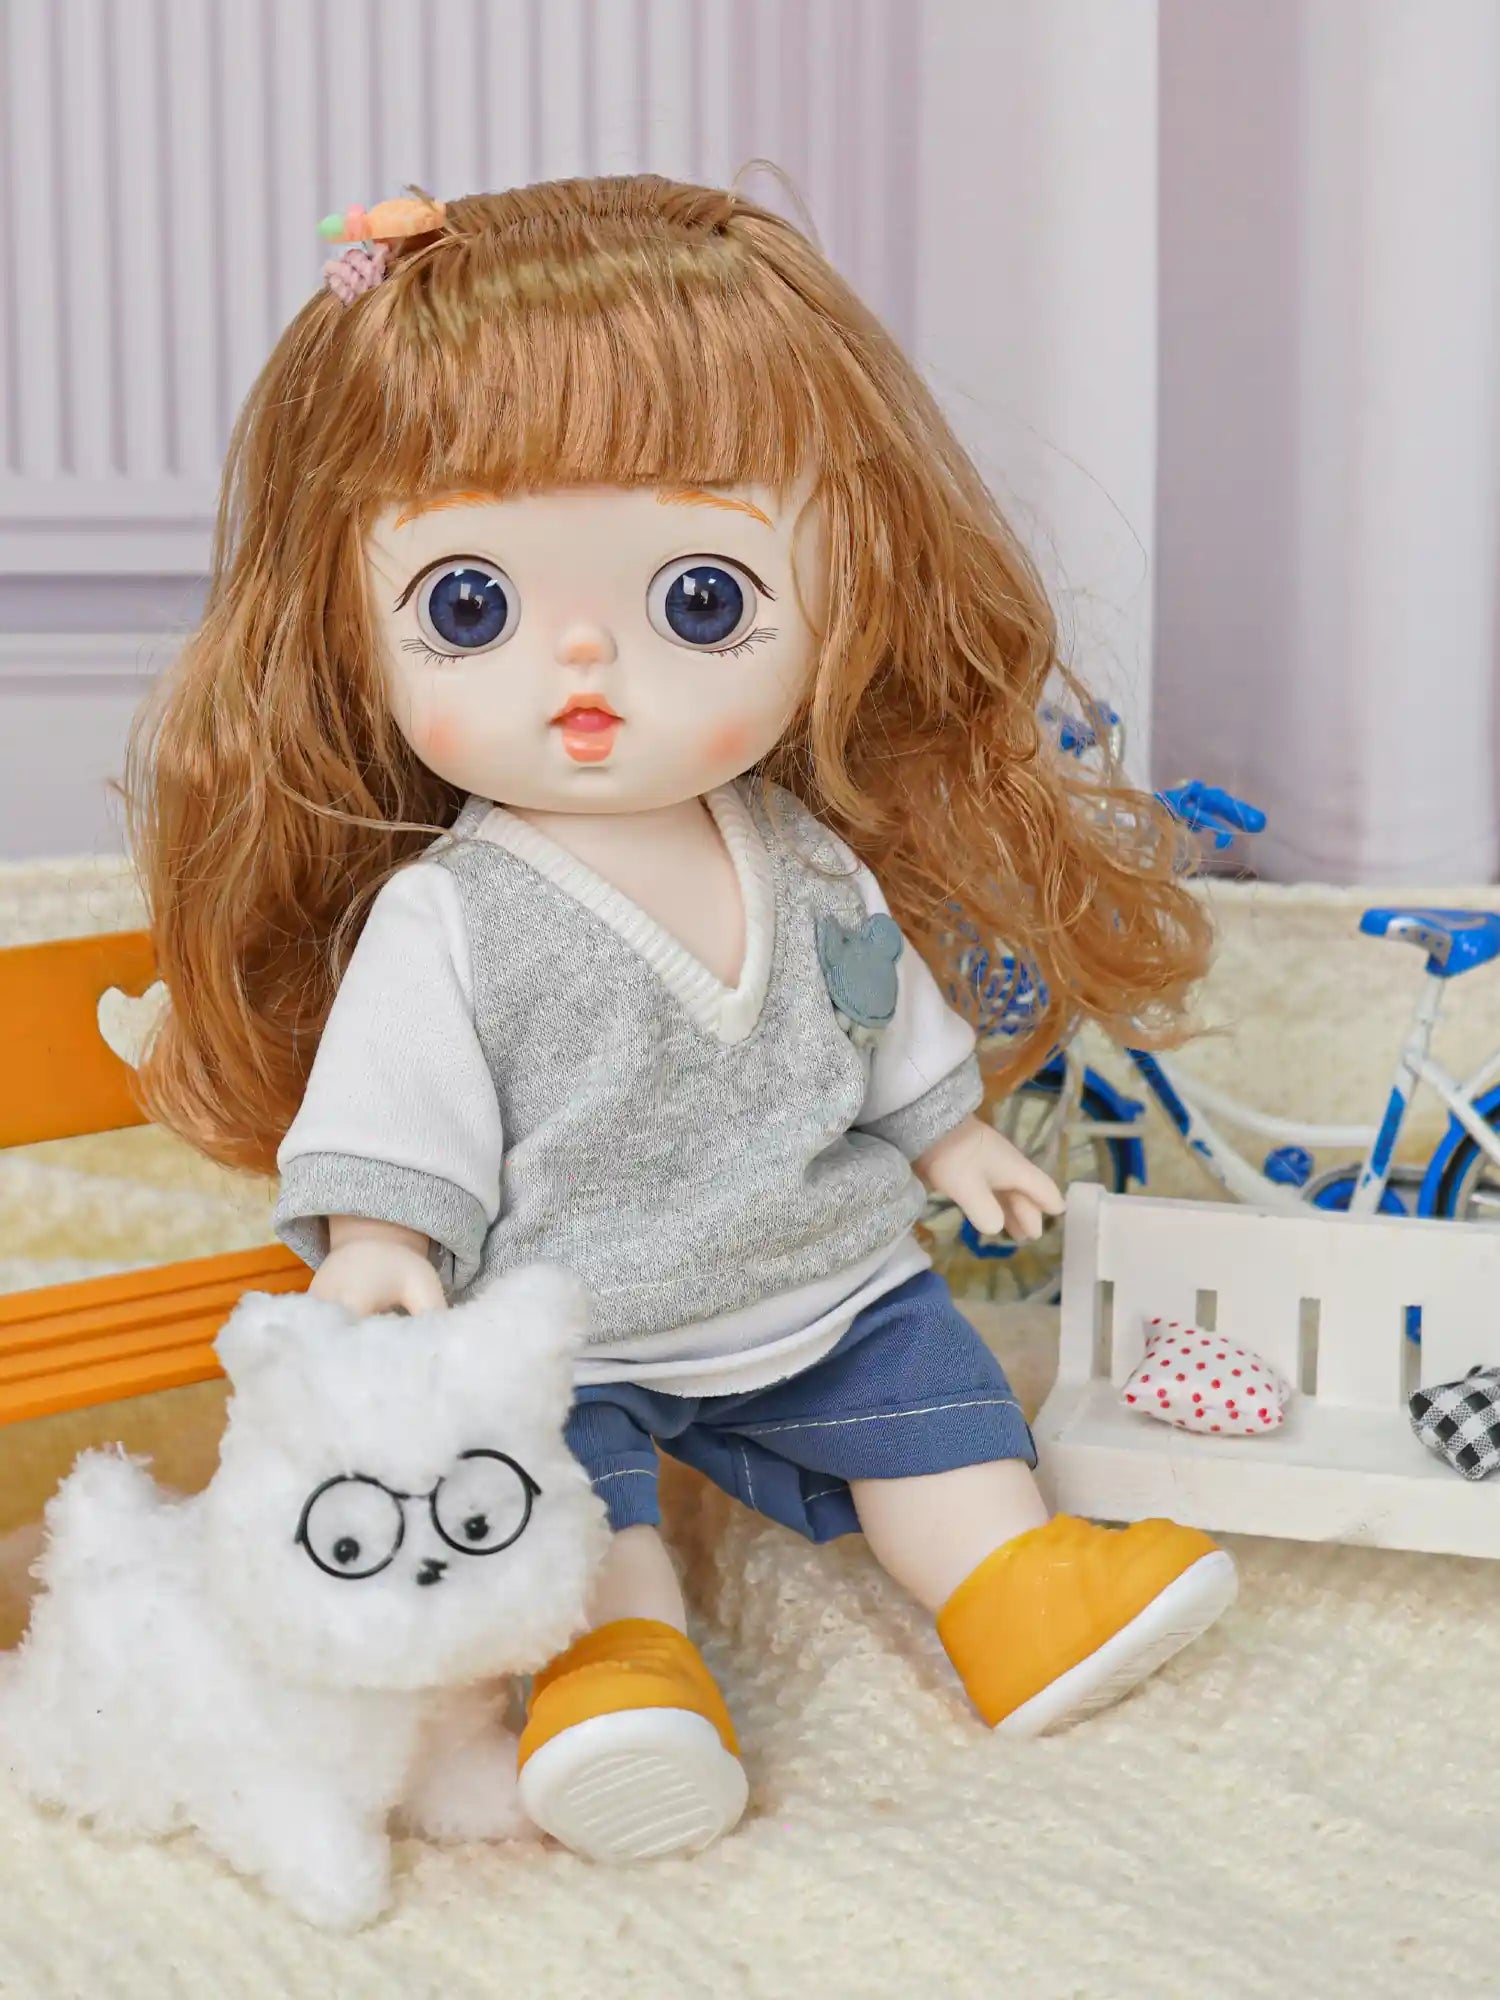 Fashion doll with a surprised expression, wearing casual clothes and yellow shoes, with a fuzzy companion.